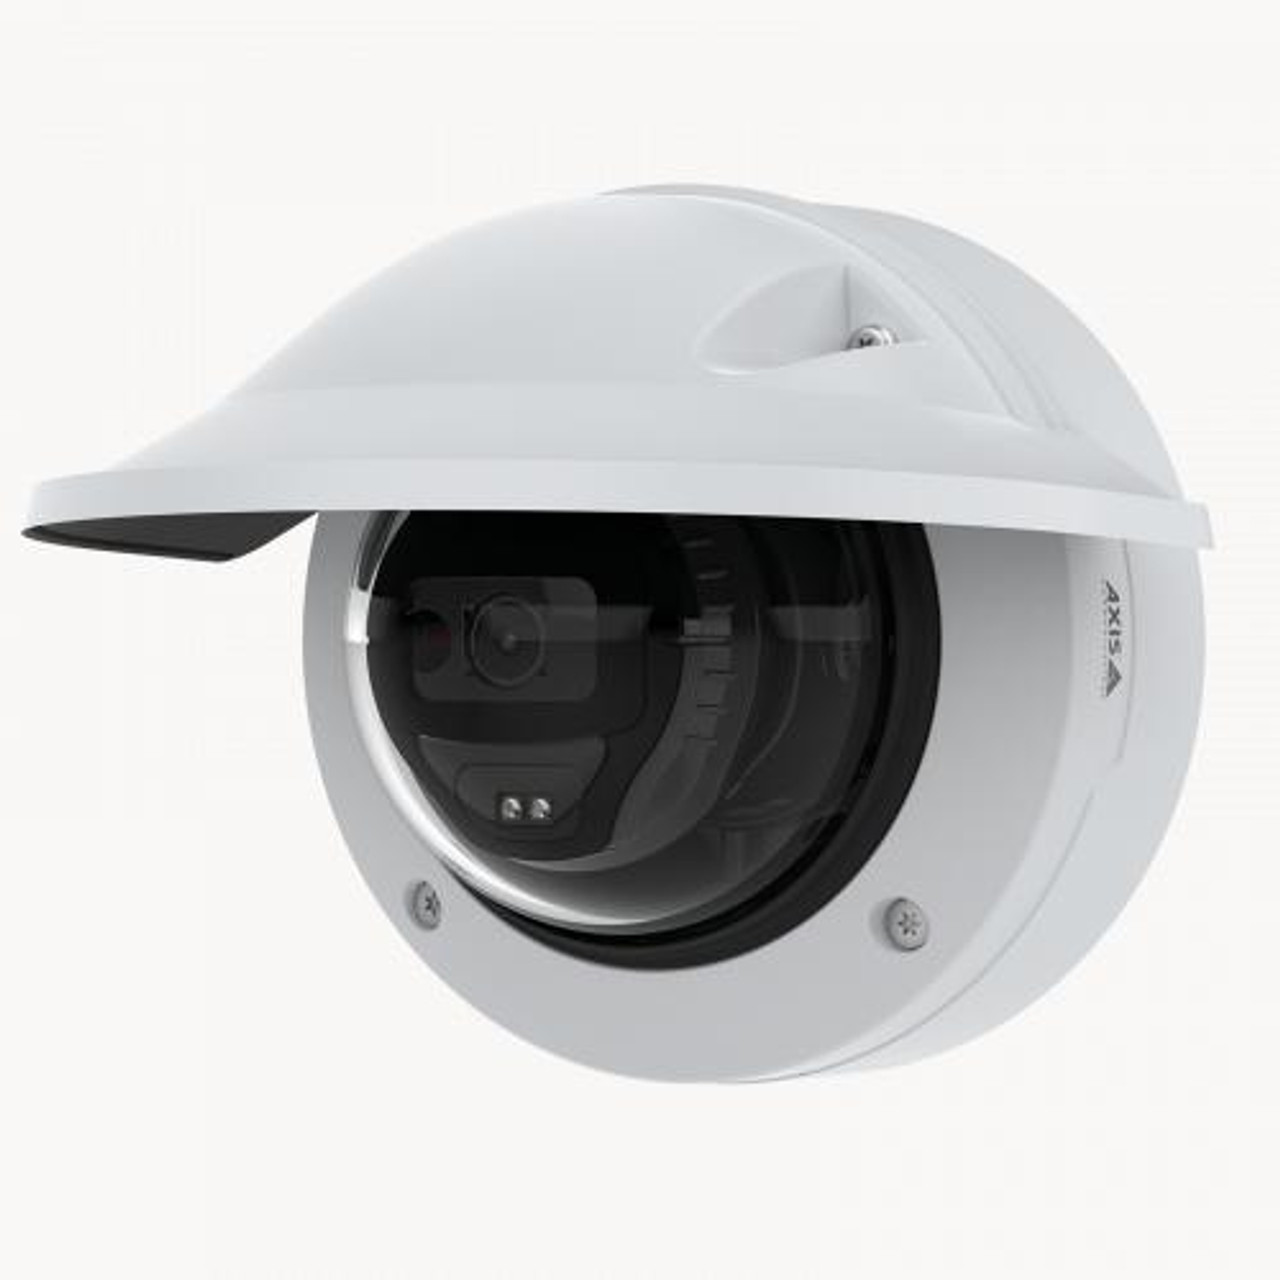 AXIS M3215-LVE (02371-001) Dome IP Security Camera